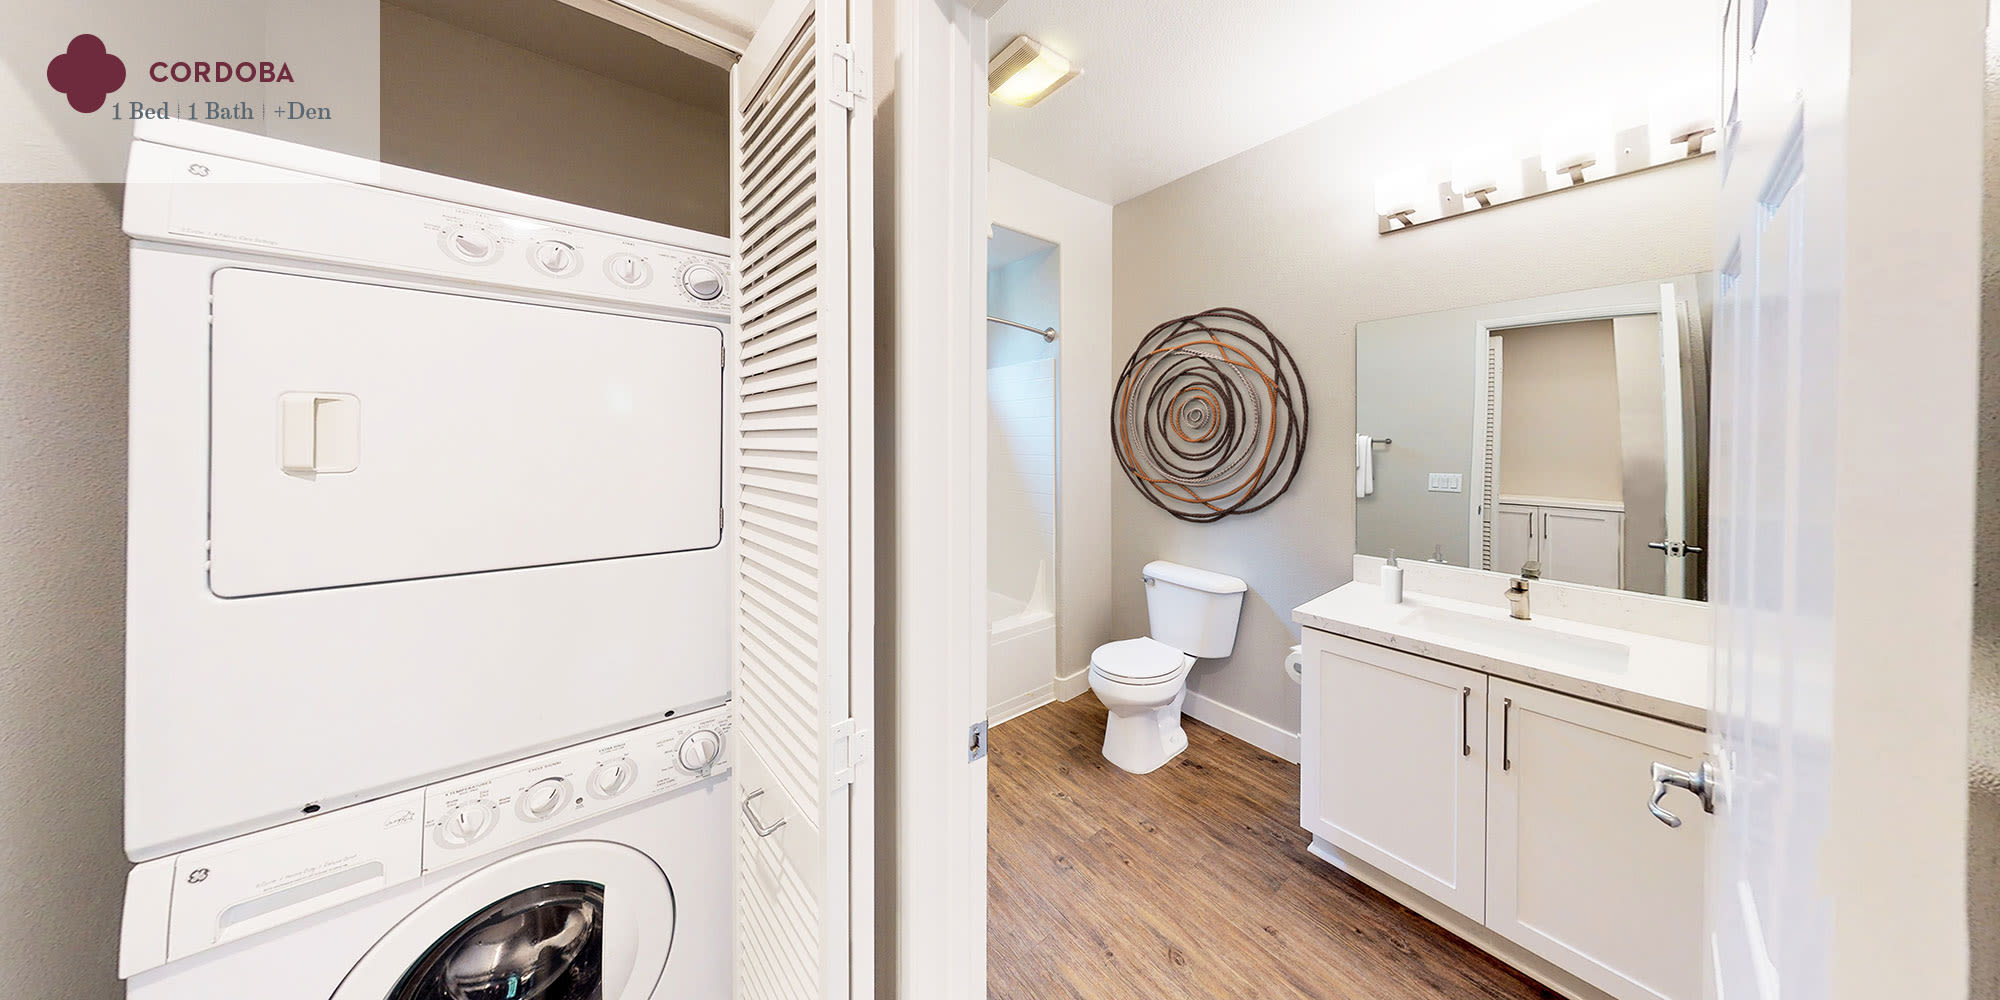 Bathroom and washer-dryer in a one-bedroom apartment home at Mission Hills in Camarillo, California